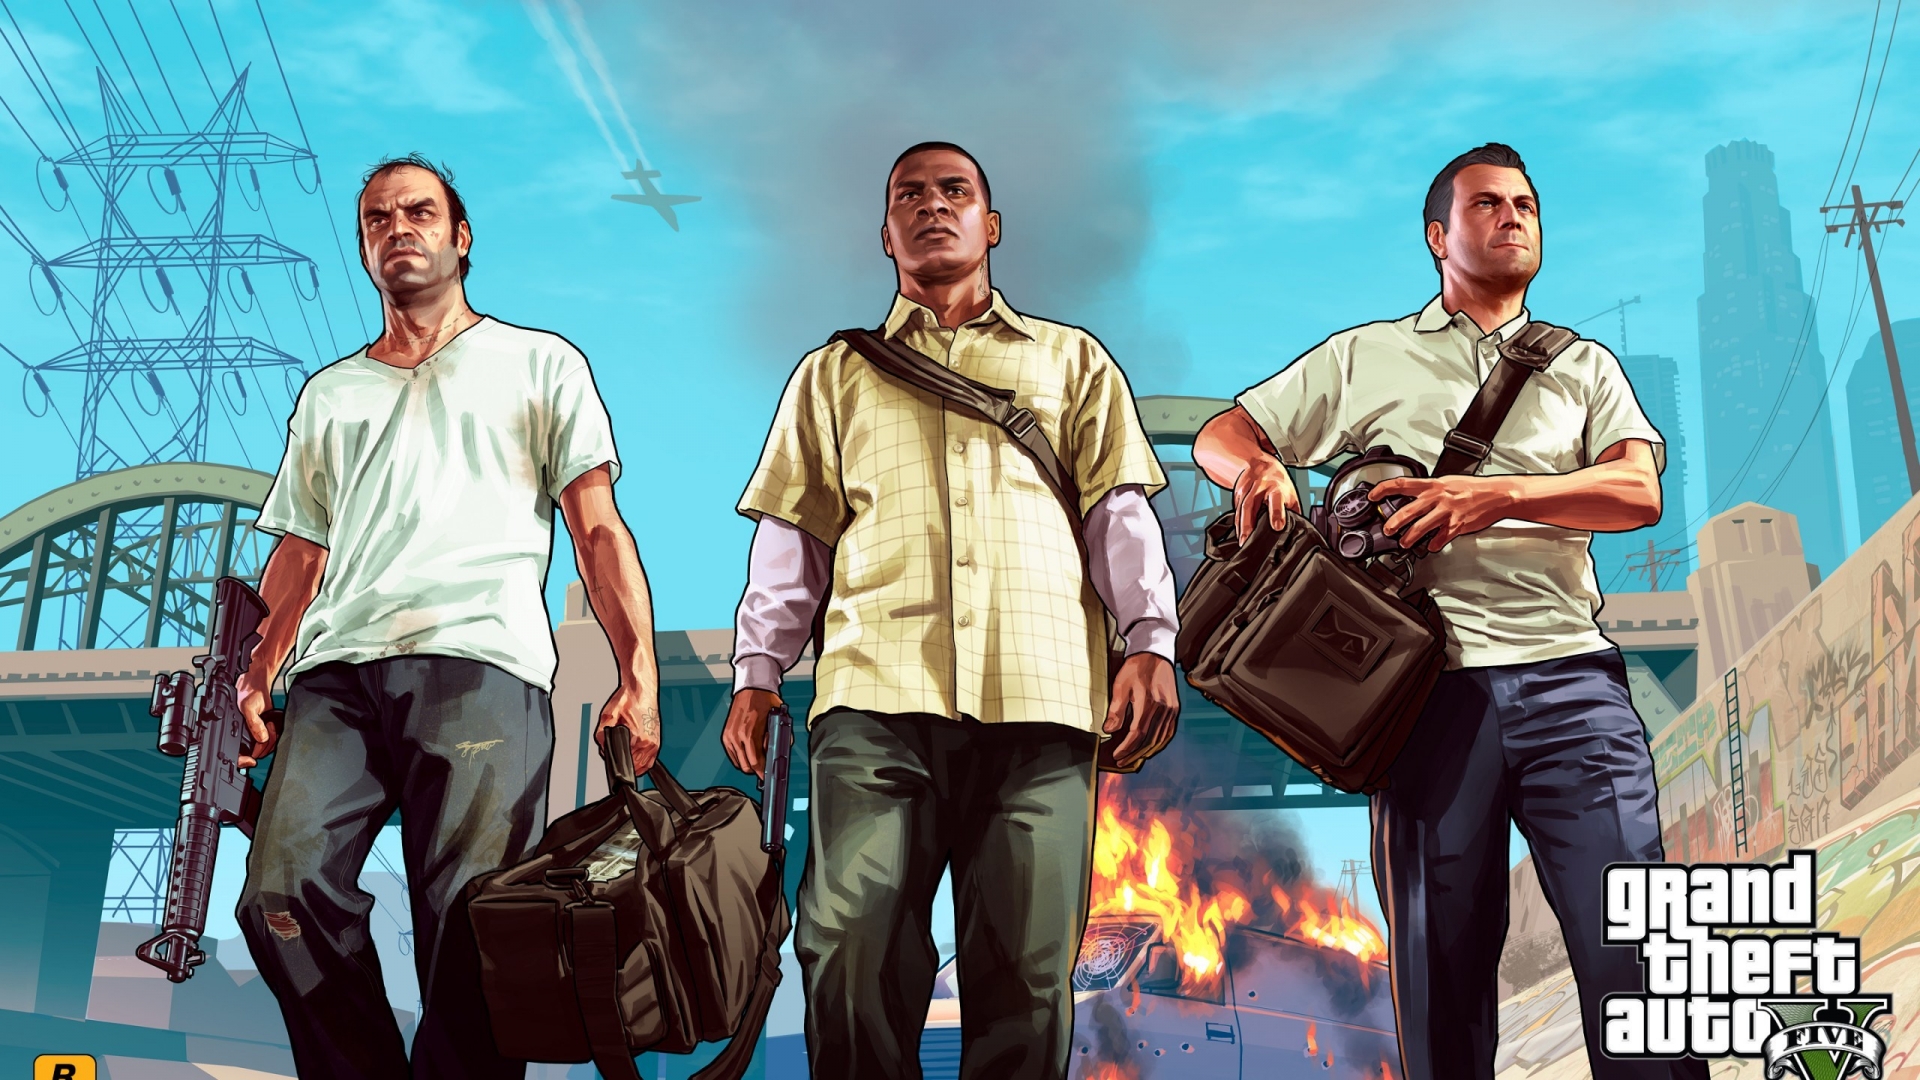 Grand Theft Auto Vice City for 1920 x 1080 HDTV 1080p resolution